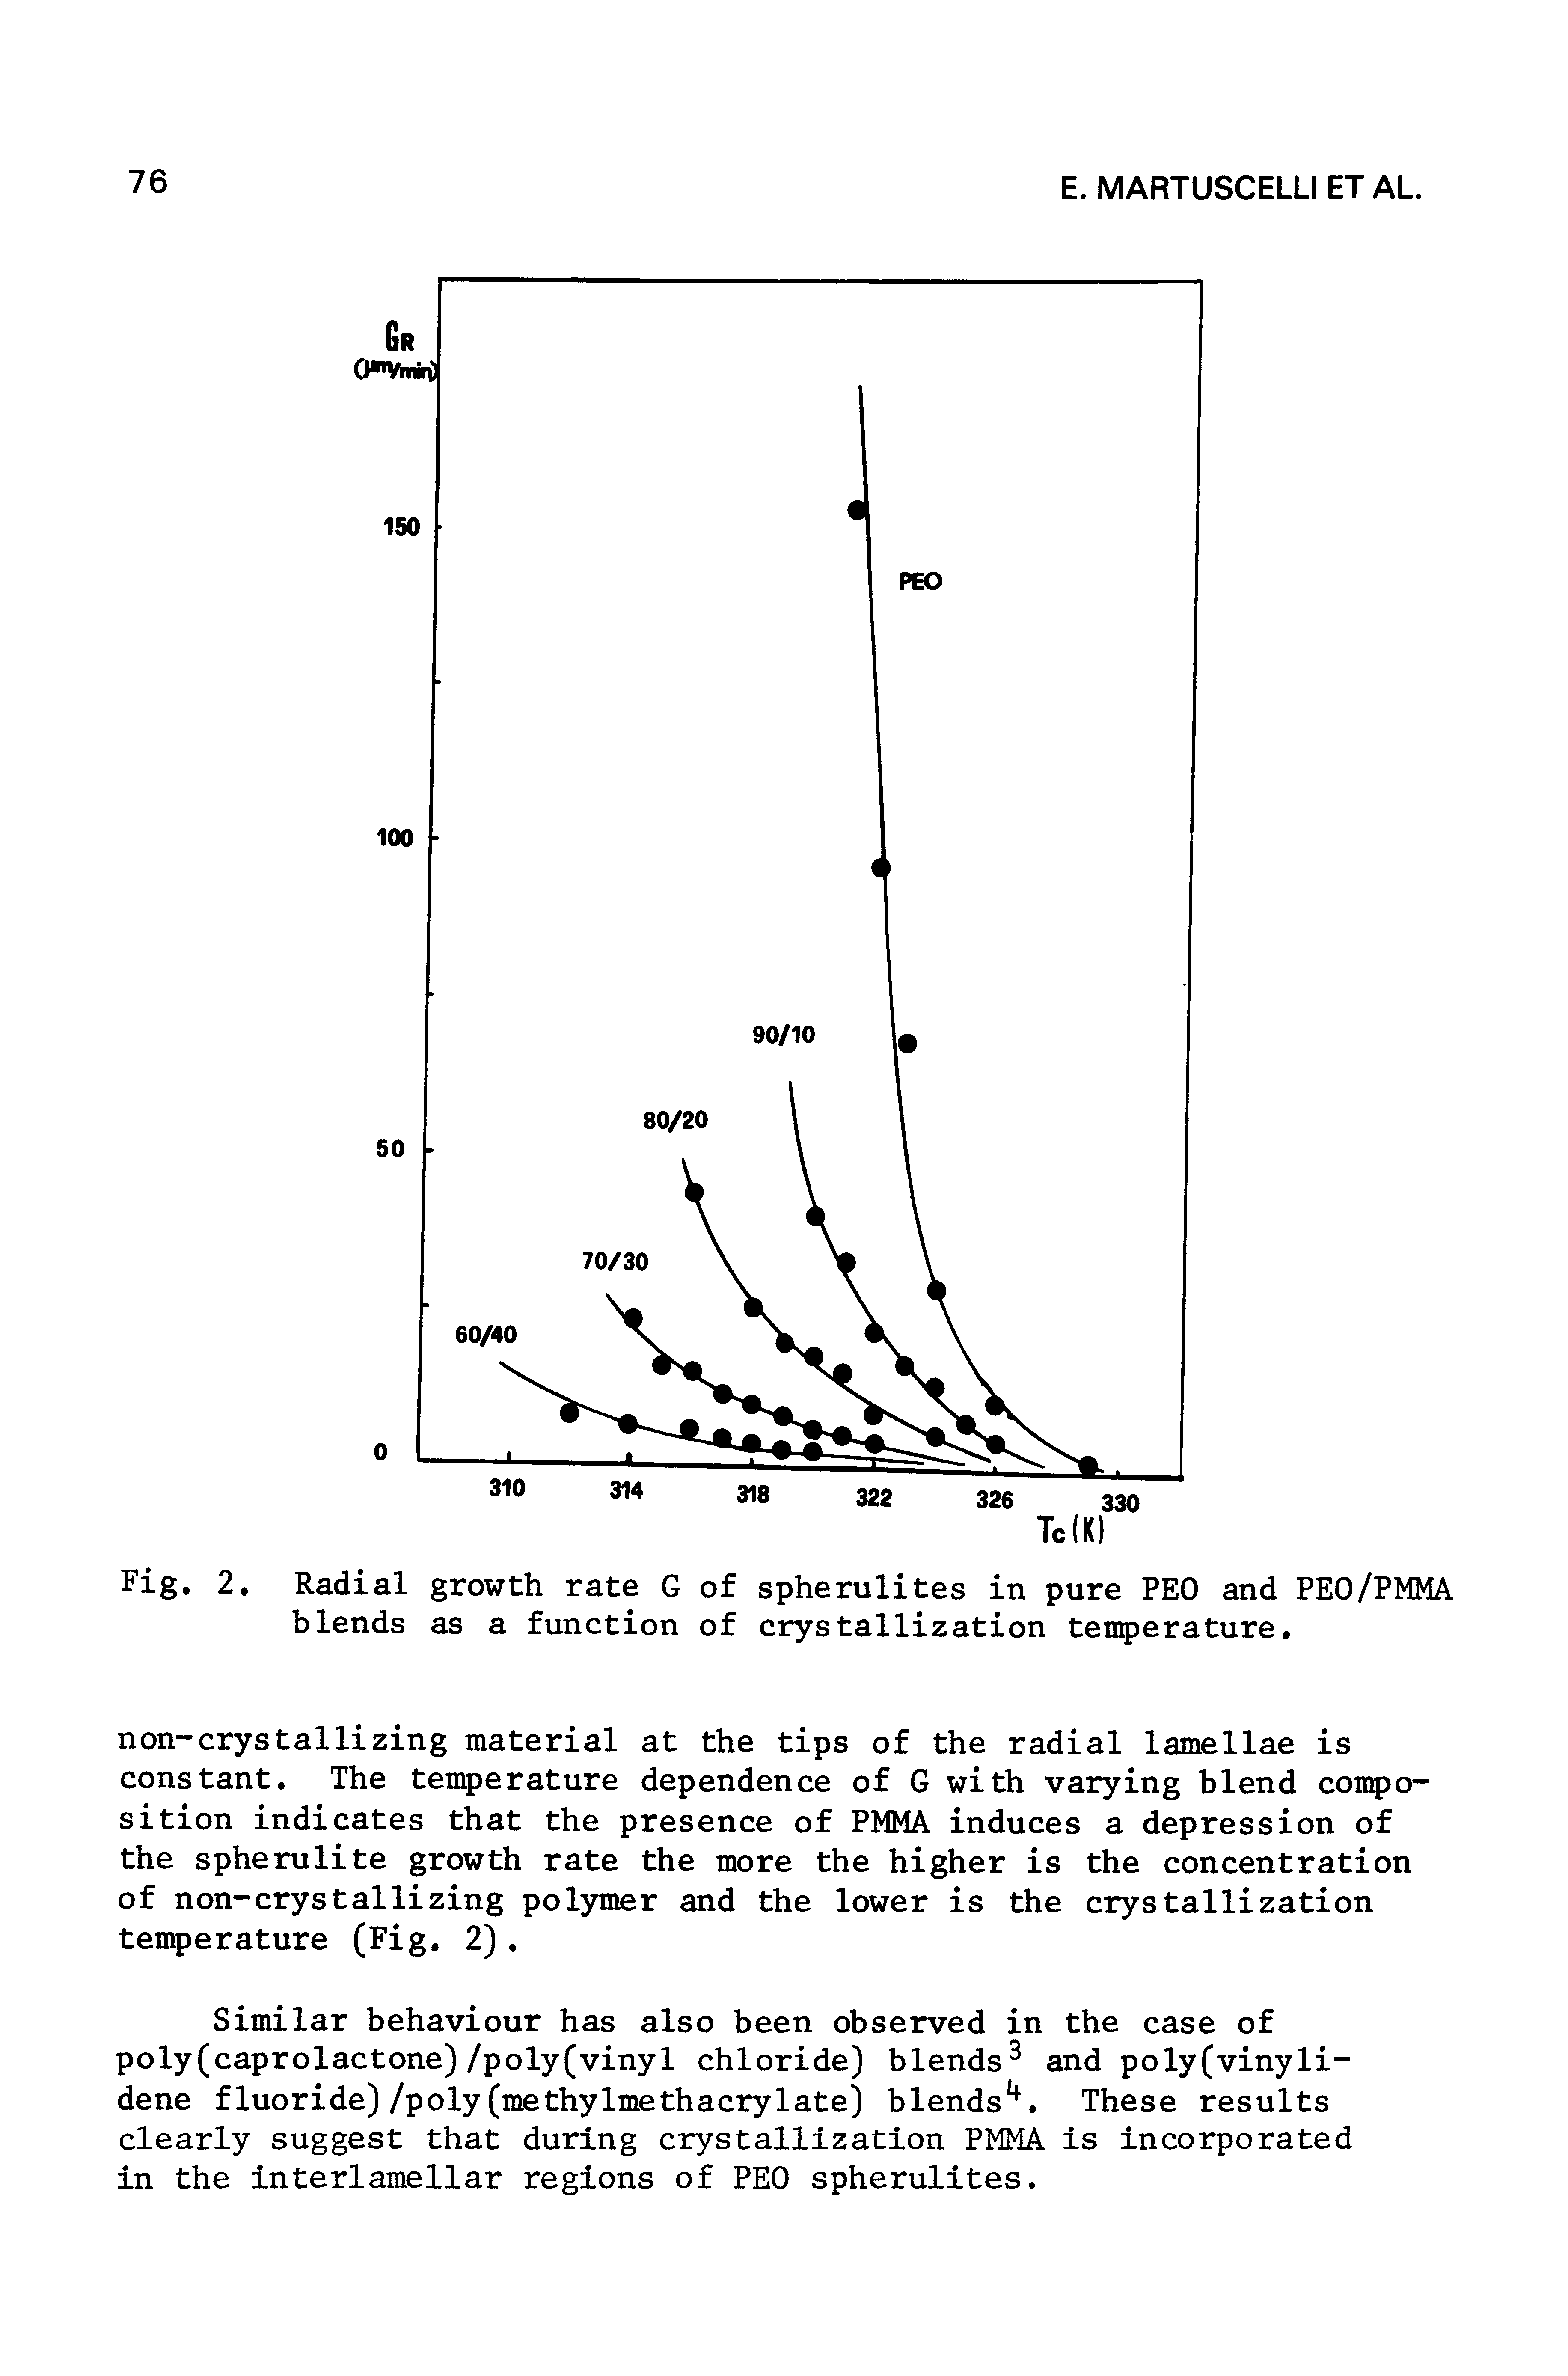 Fig. 2, Radial growth rate G of spherulites in pure PEG and PEO/PMMA blends as a function of crystallization temperature.